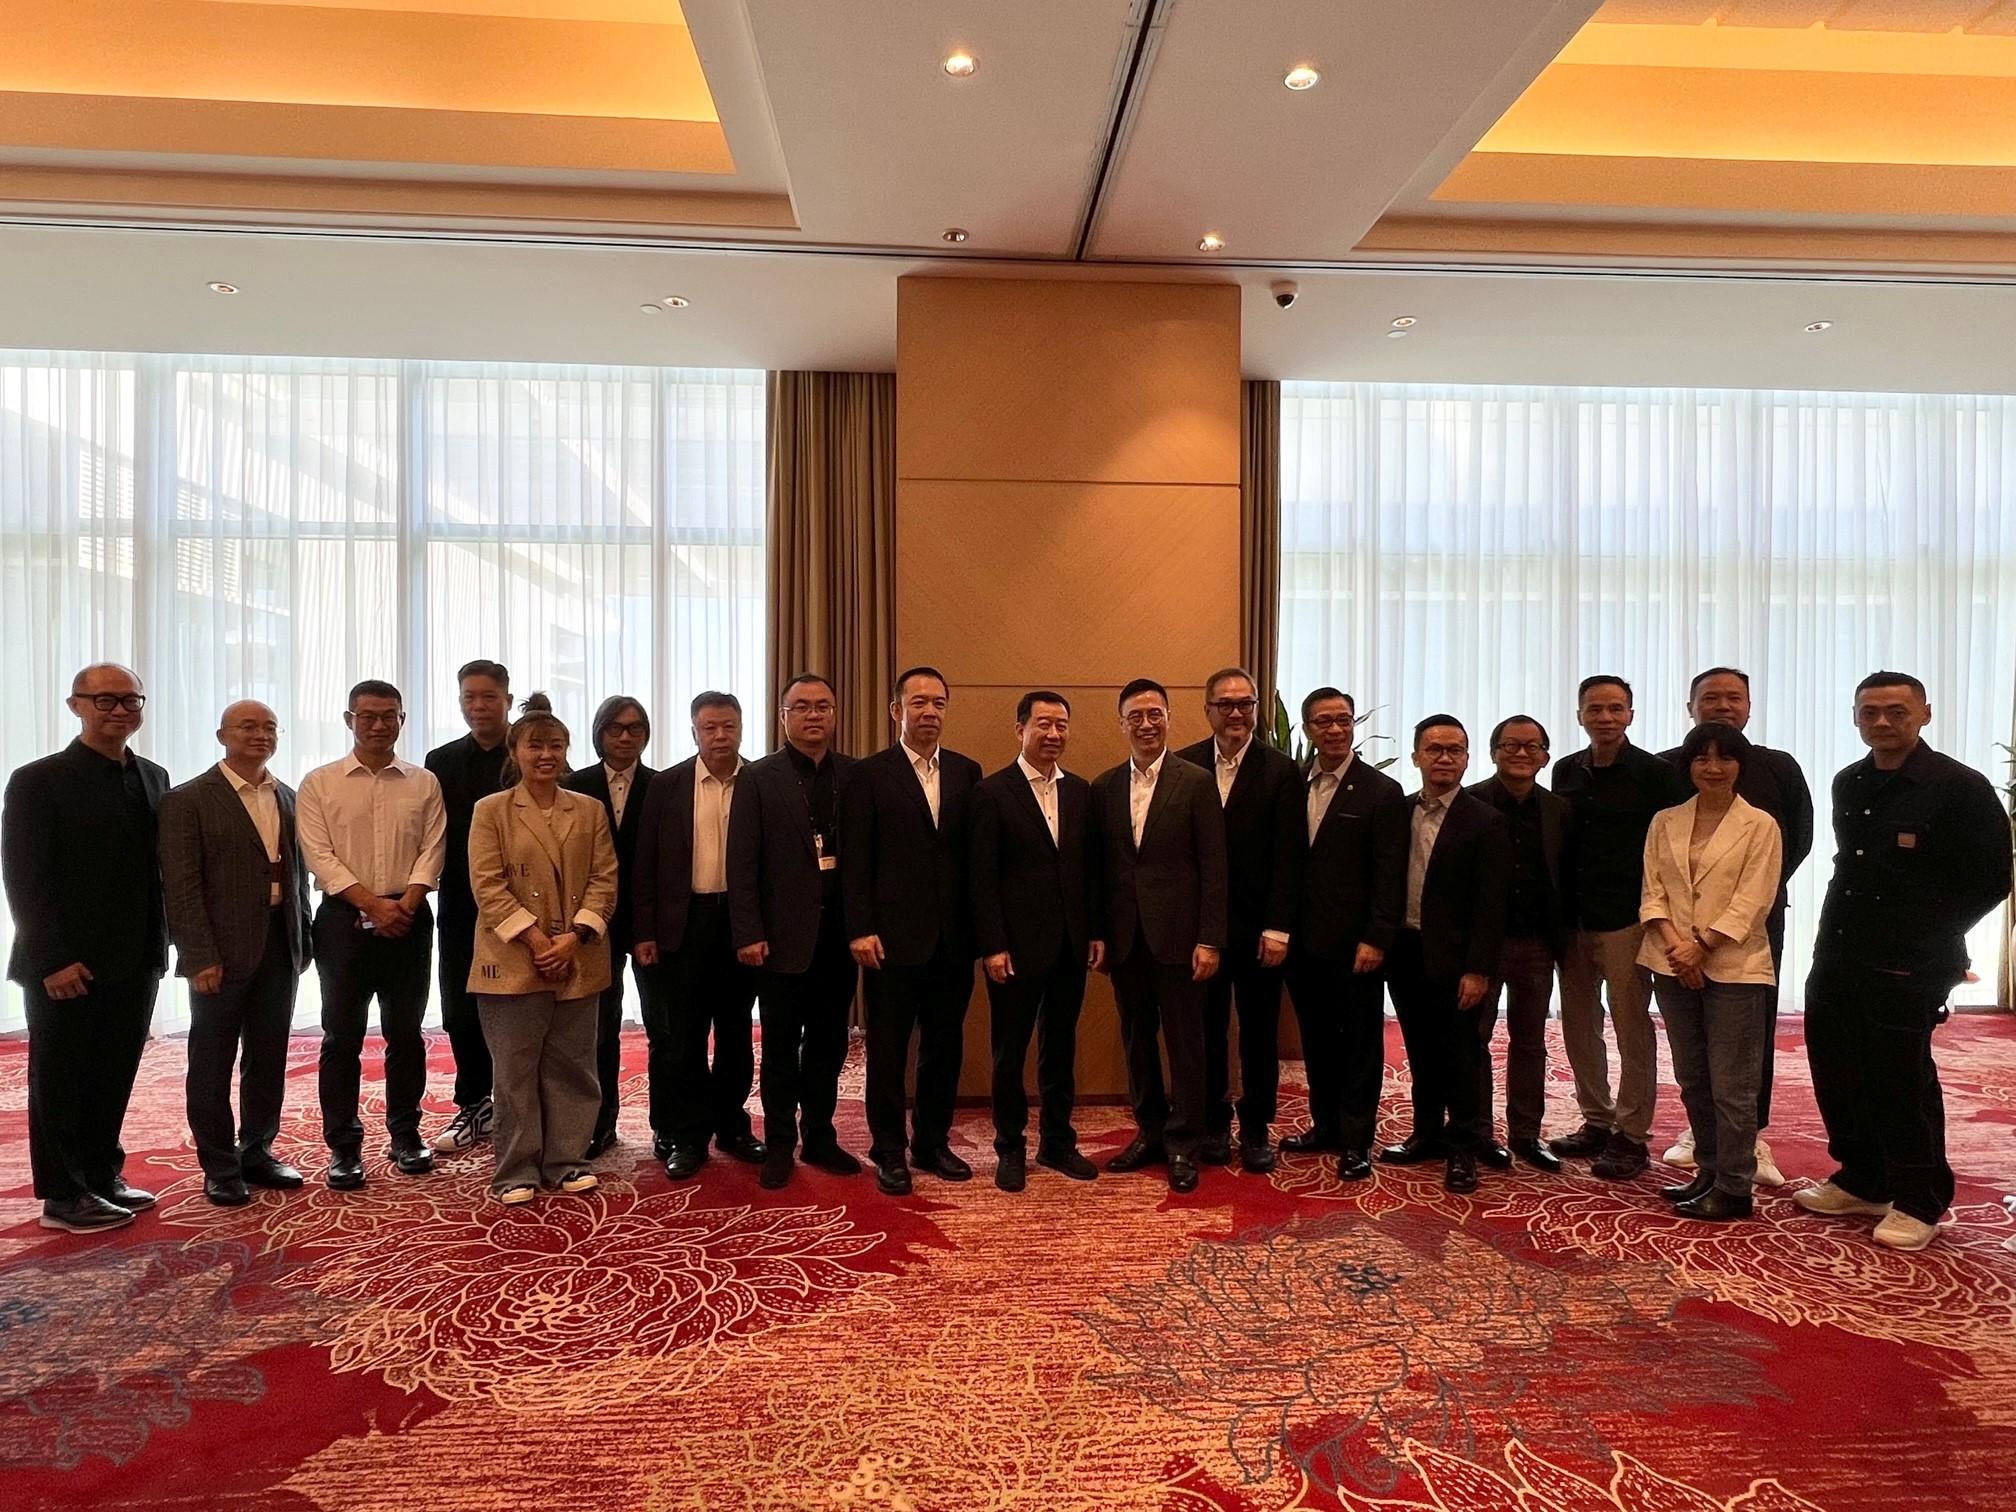 The Secretary for Culture, Sports and Tourism, Mr Kevin Yeung (back row, eighth right), exchanged views with industry practitioners from Hong Kong and the Mainland in Xiamen today (November 2) to discuss further collaborations in driving Hong Kong and Mainland film industries.